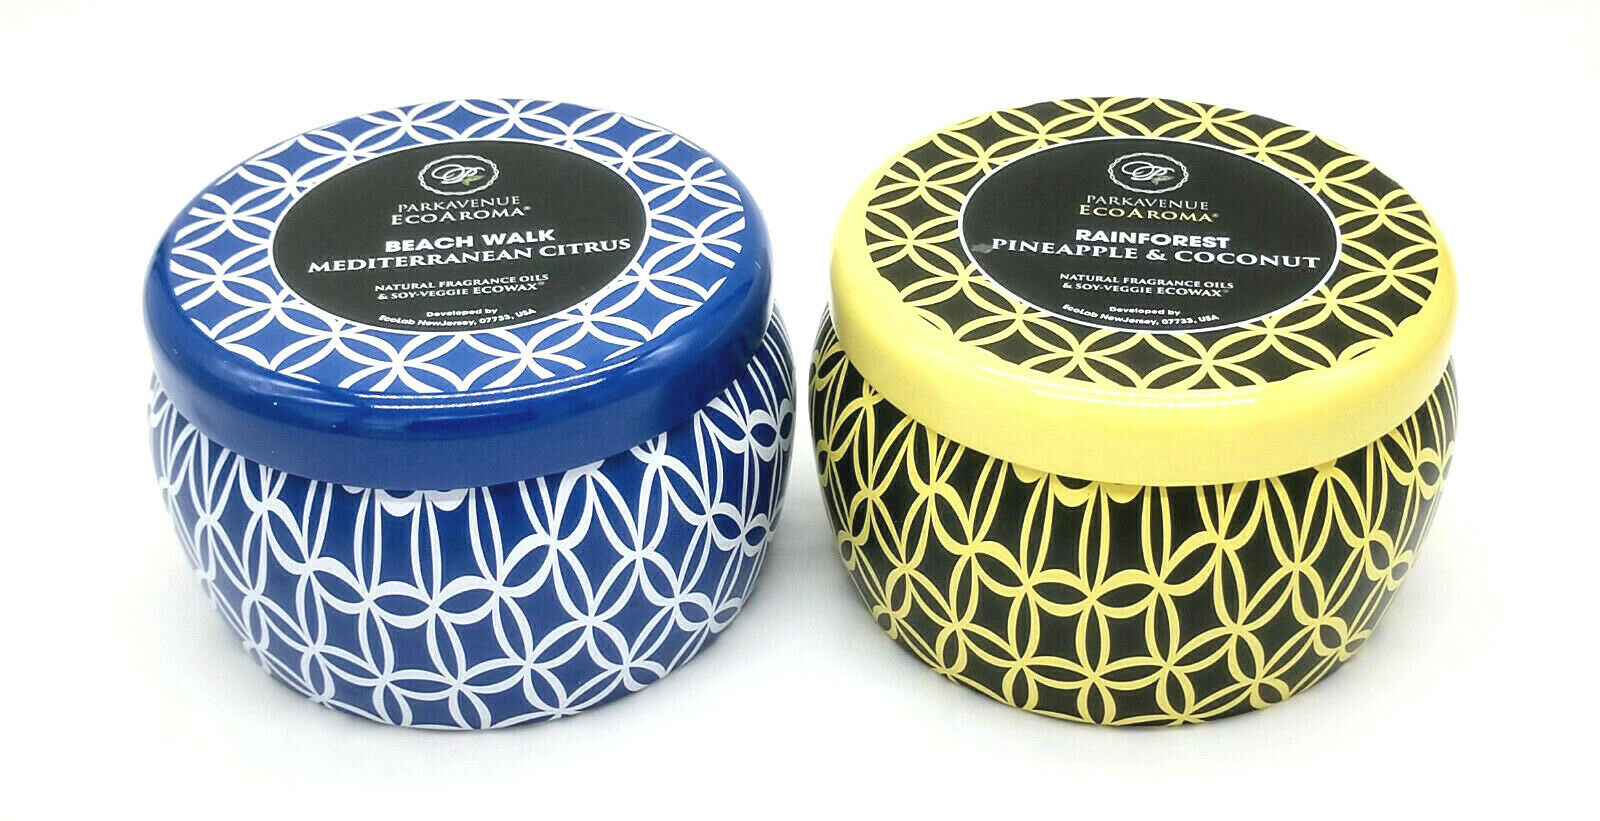 CocoSoy Eco Aroma Tin Candles Organic Natural Botanicals 2-Pack Multiple Scents